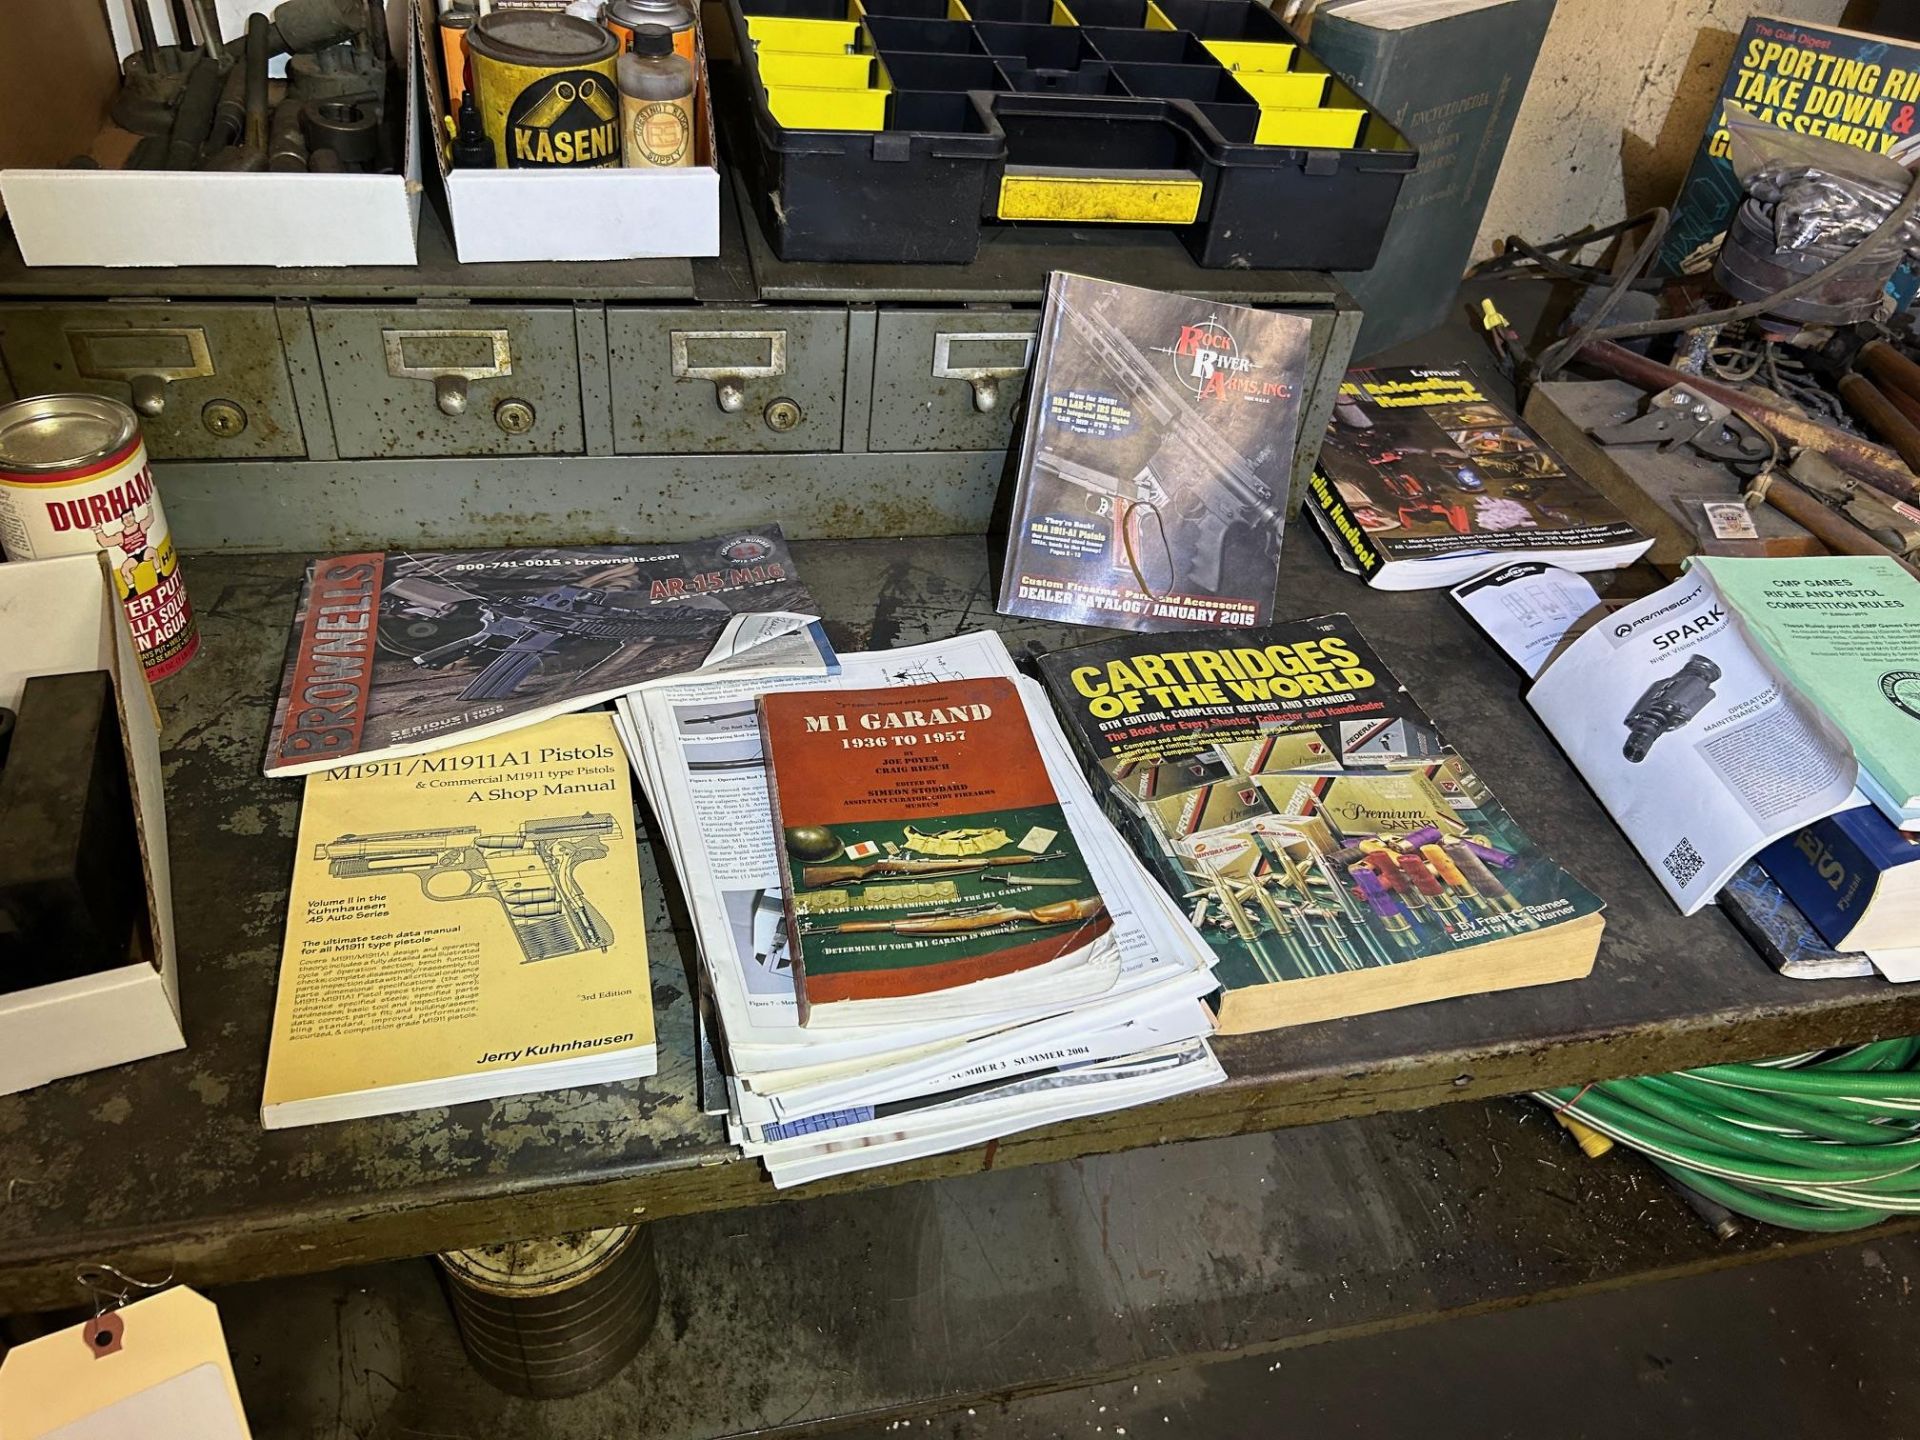 Table and Contents of Gunsmithing Tools, Lead Billets, Gun Smith Journals and Manuals - Image 5 of 8